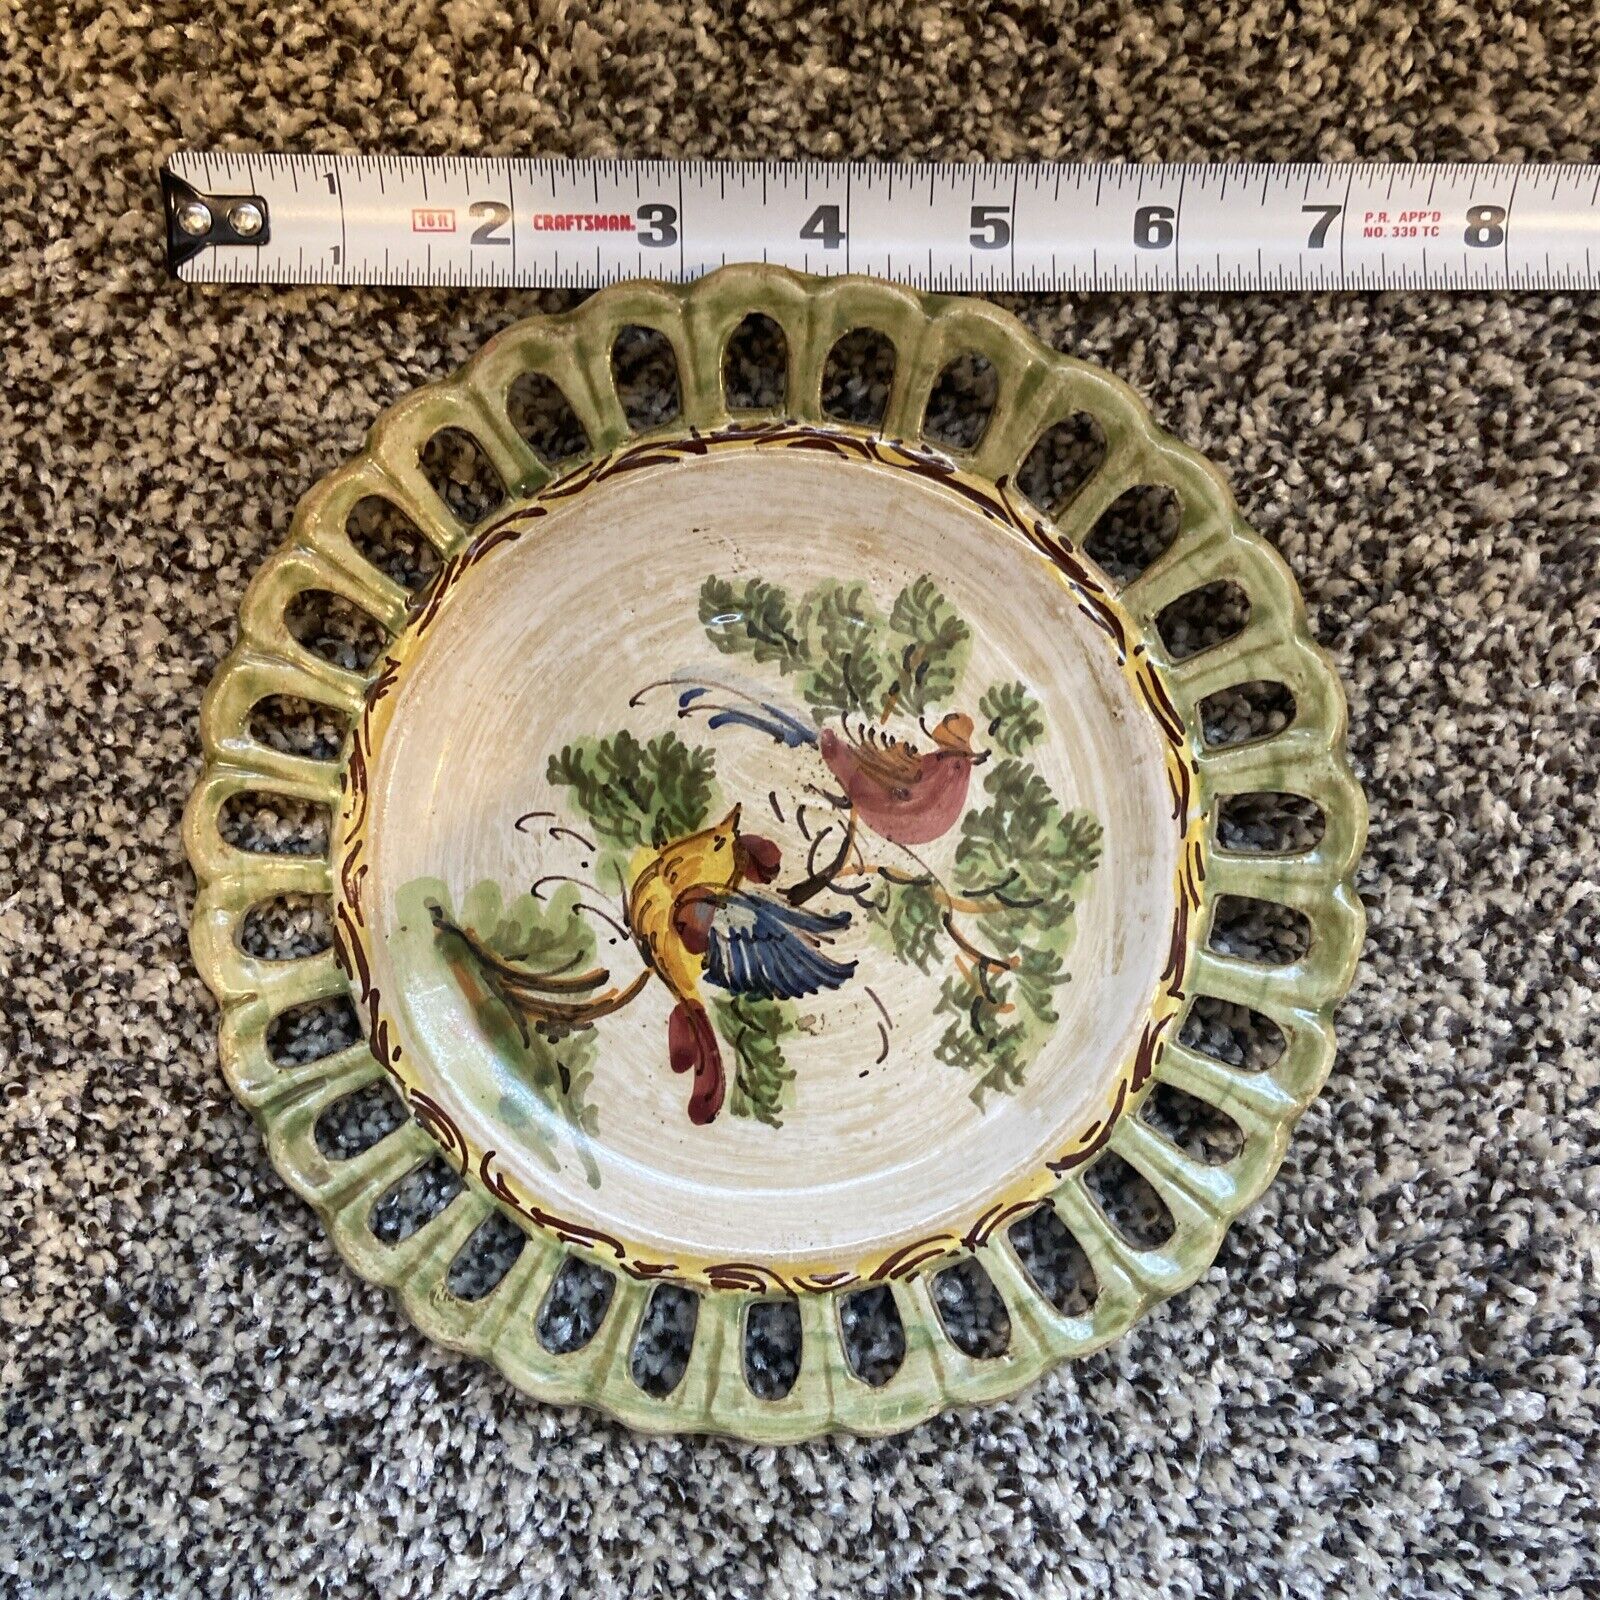 Vintage Meiselman Imports Italy Collector Plate # K884